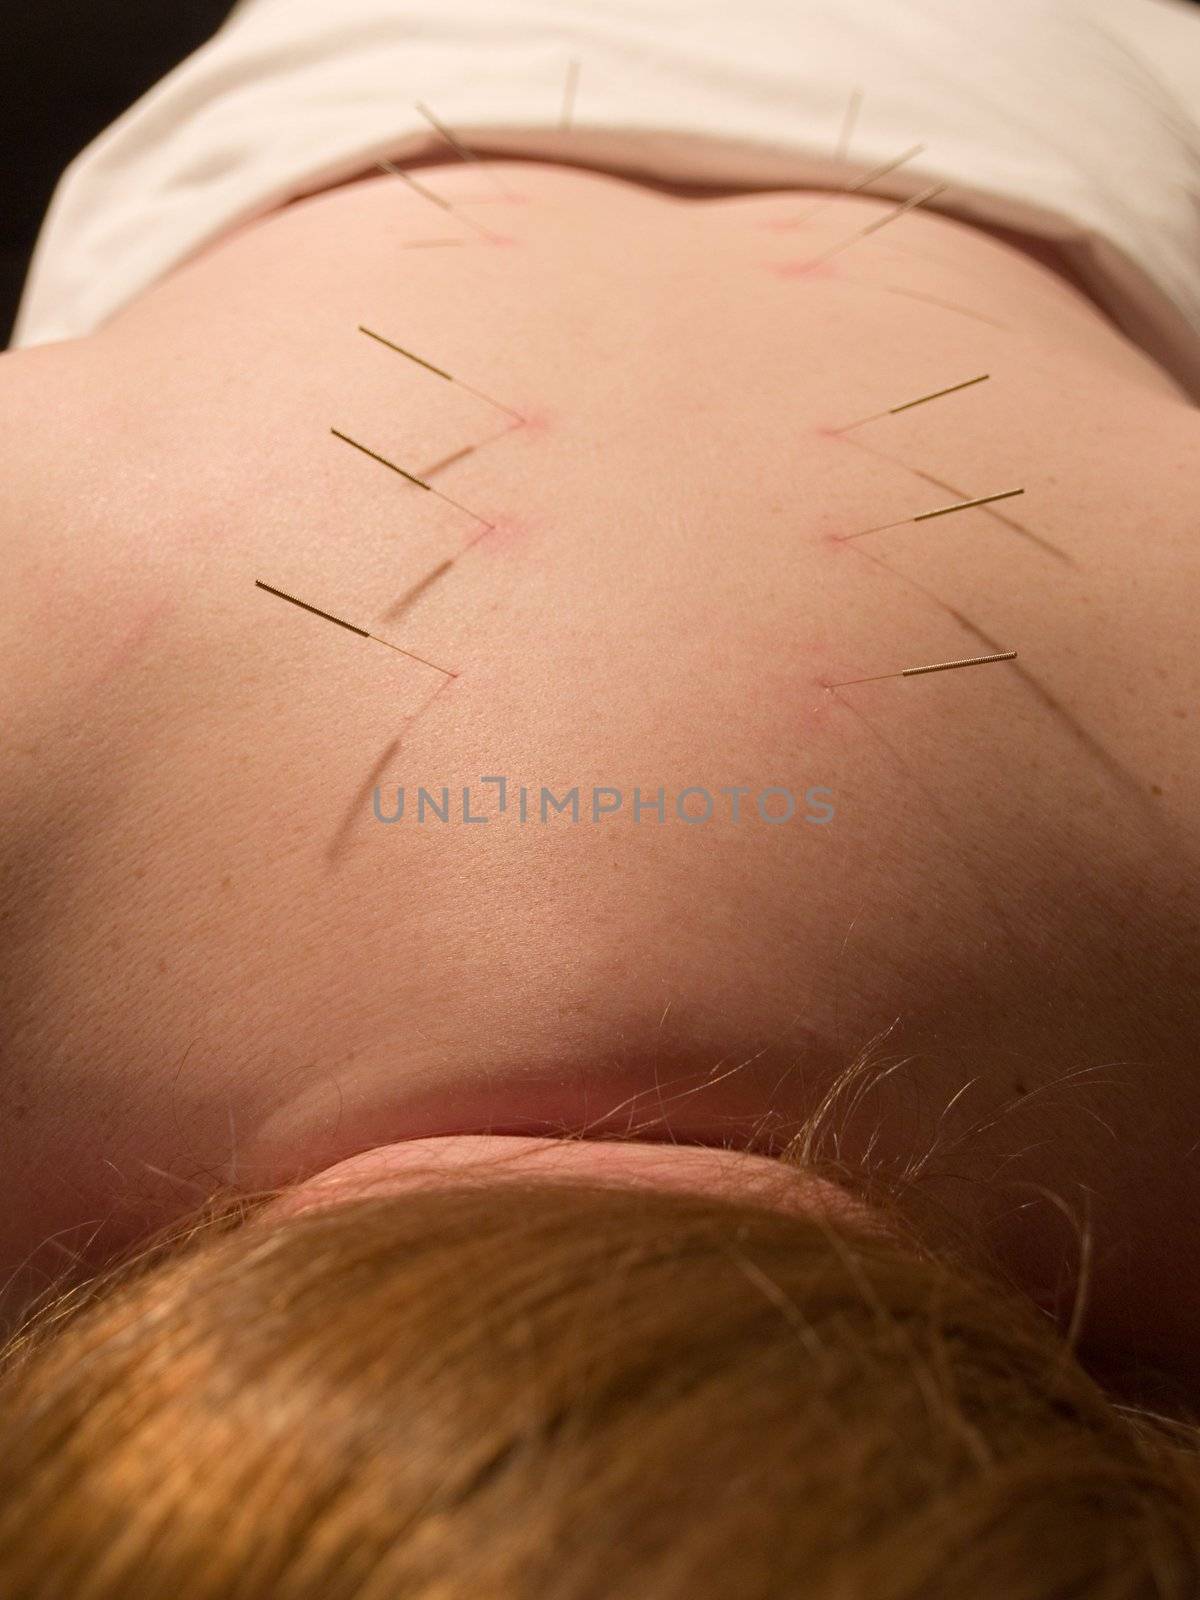 The Eastern or Asian acupuncture medical treatment said to prevent or treat a variety of medical ailments, including pain.